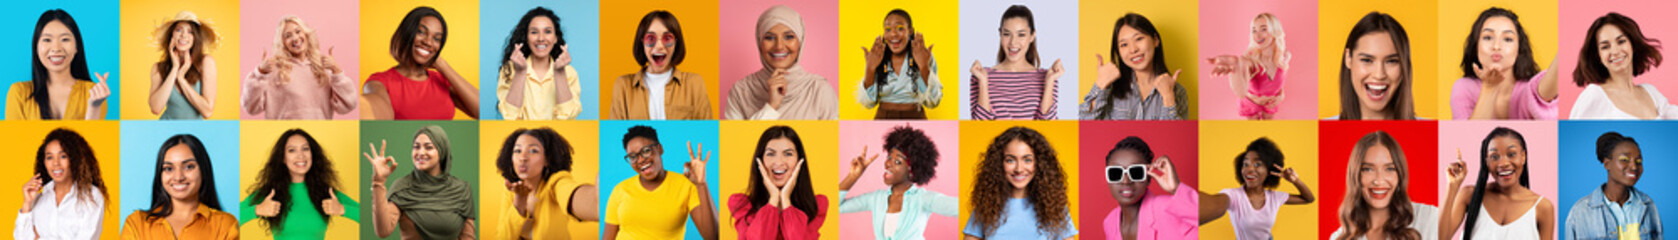 A mosaic of multi-ethnic women faces portraying a wide spectrum of human expressions on colorful...